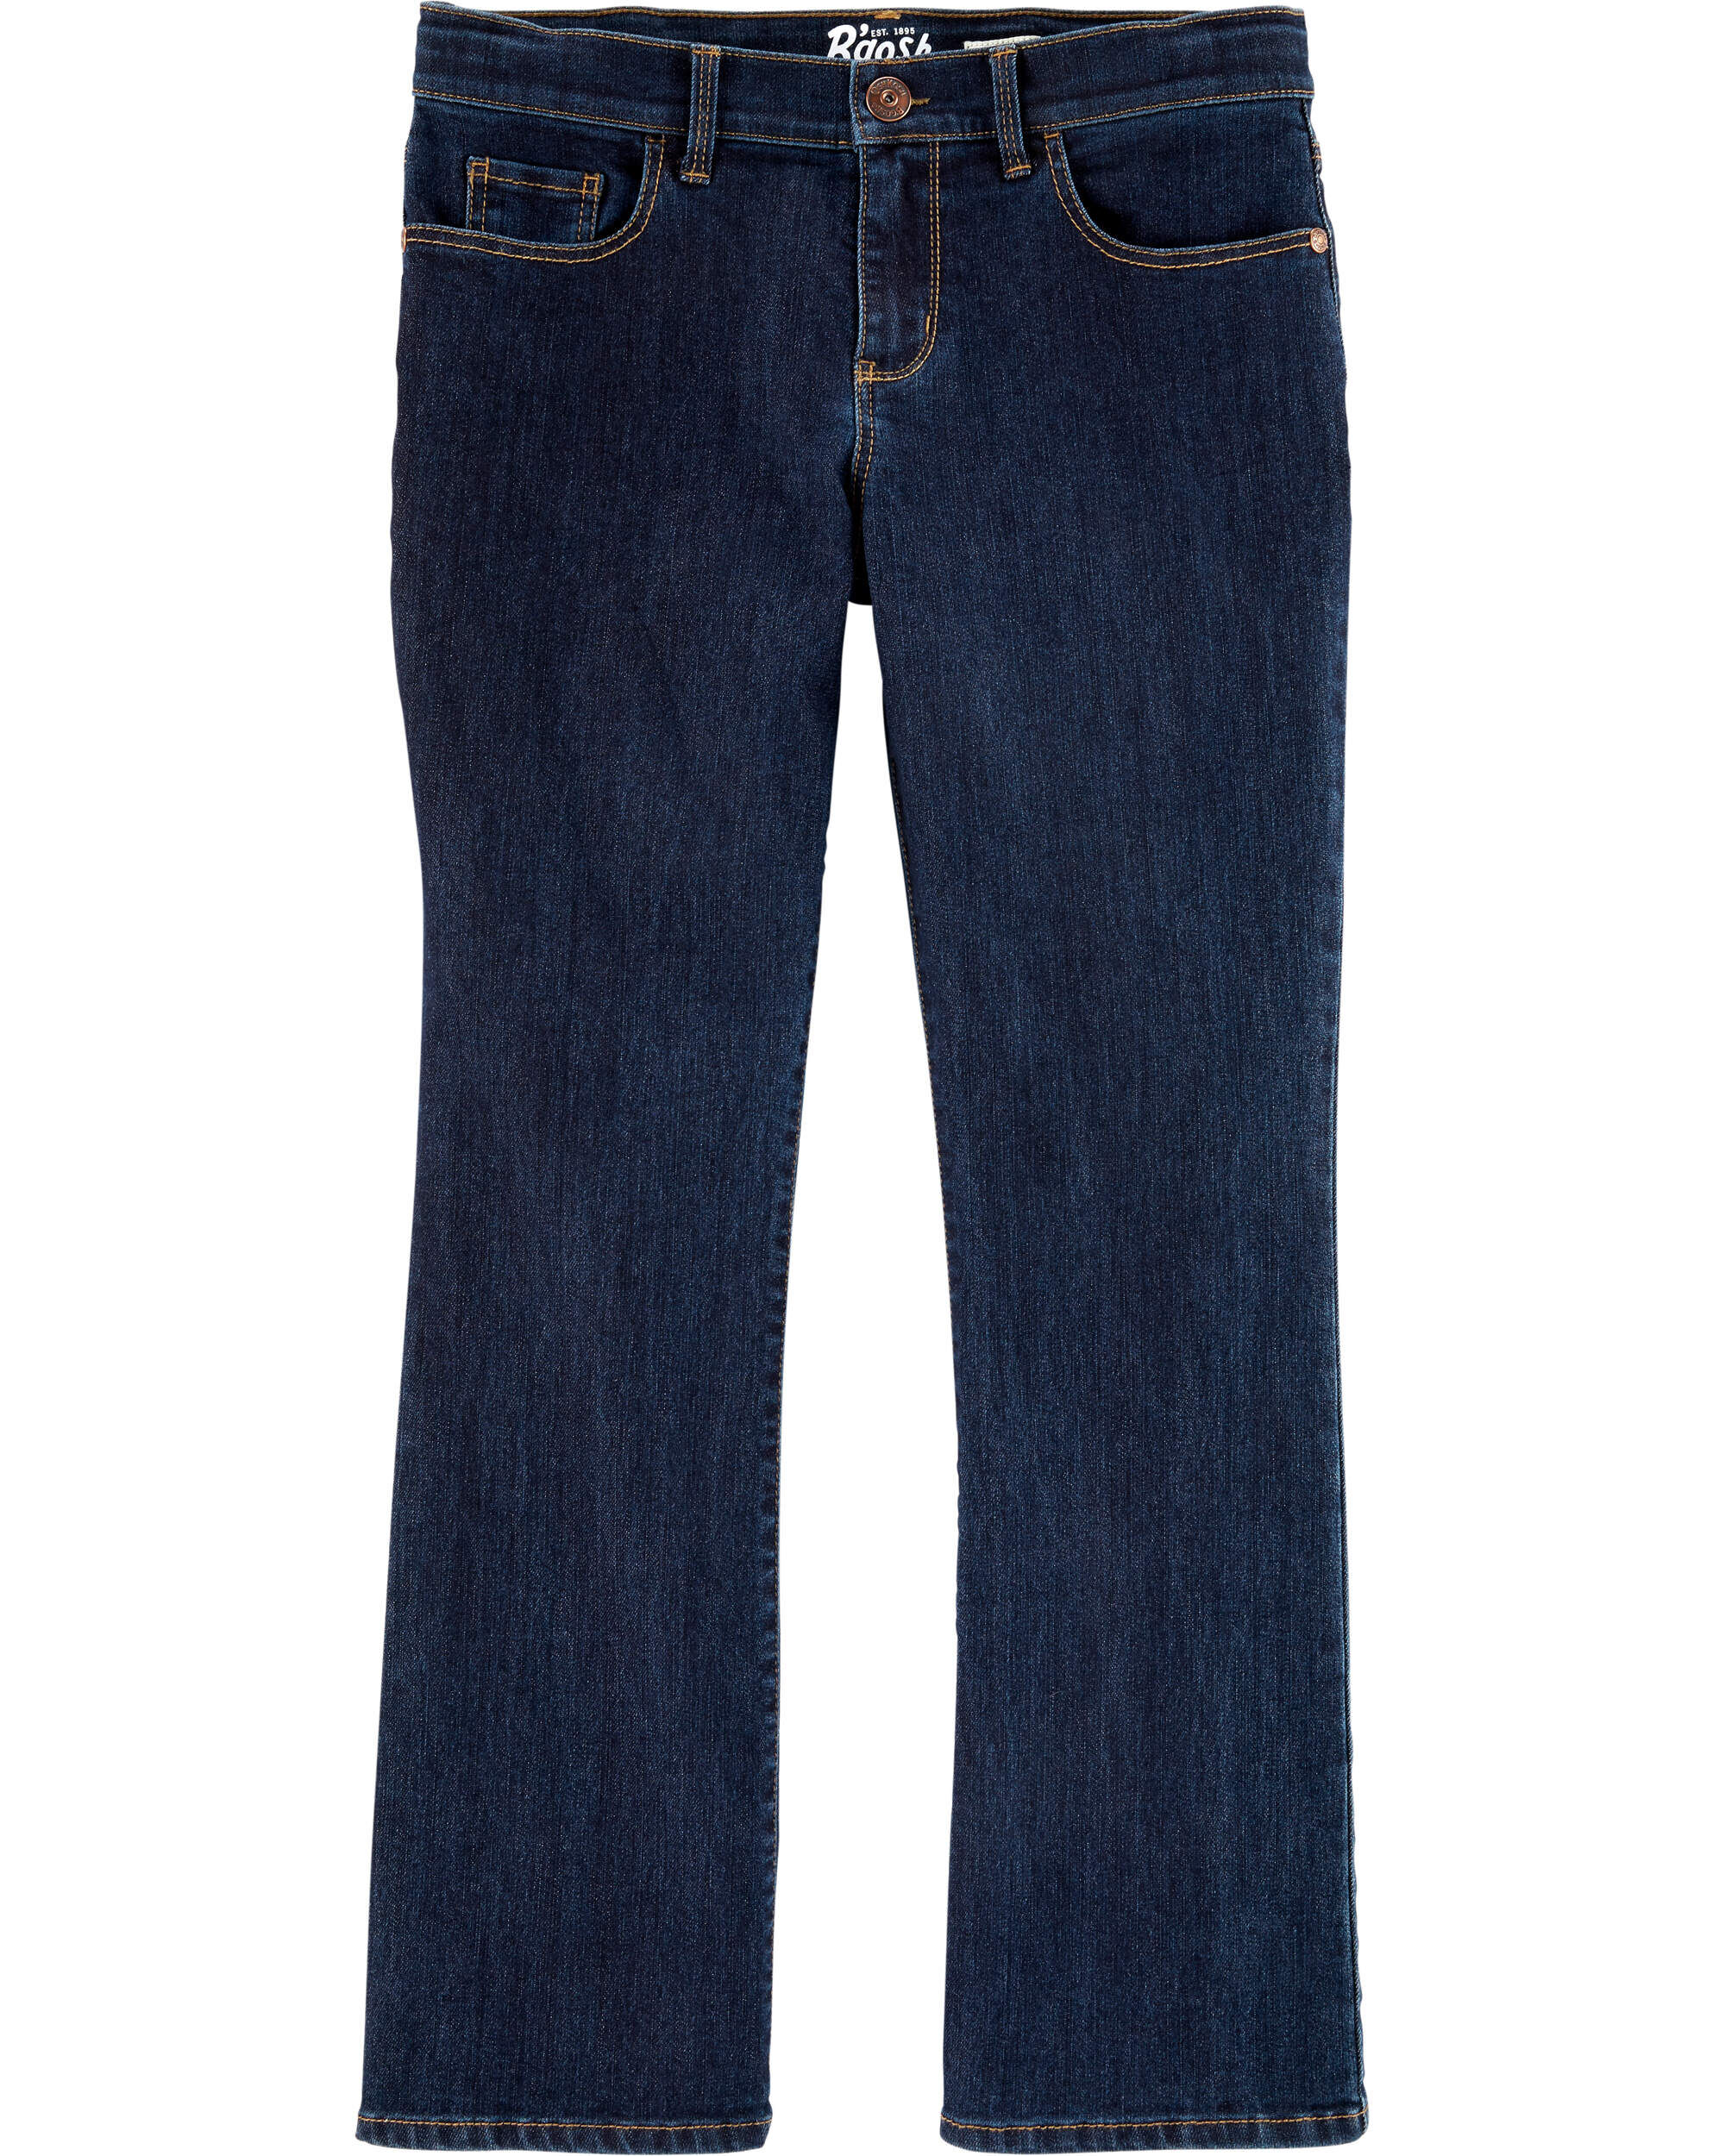 Carters Plus Fit Boot Cut Heritage Rinse Jeans